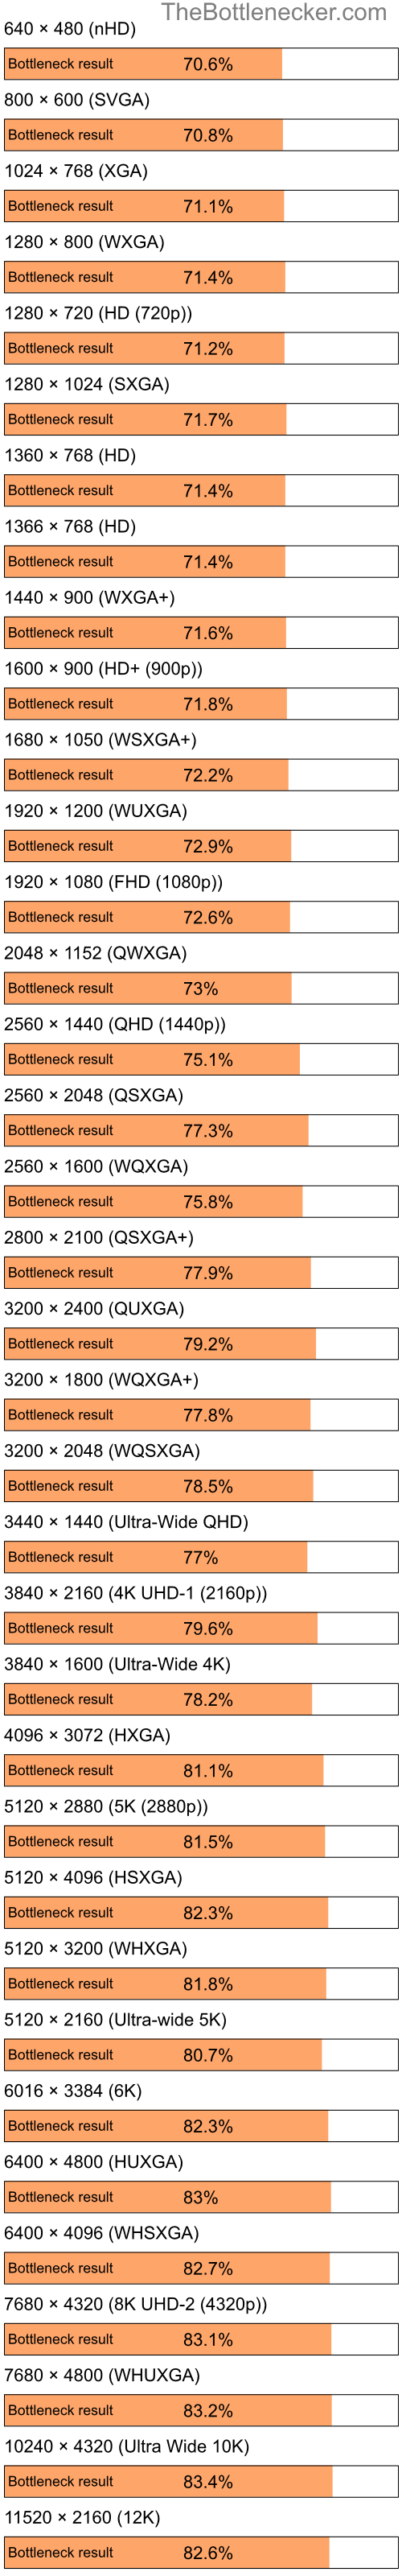 Bottleneck results by resolution for Intel Pentium 4 and AMD Mobility Radeon 9600 in Processor Intense Tasks